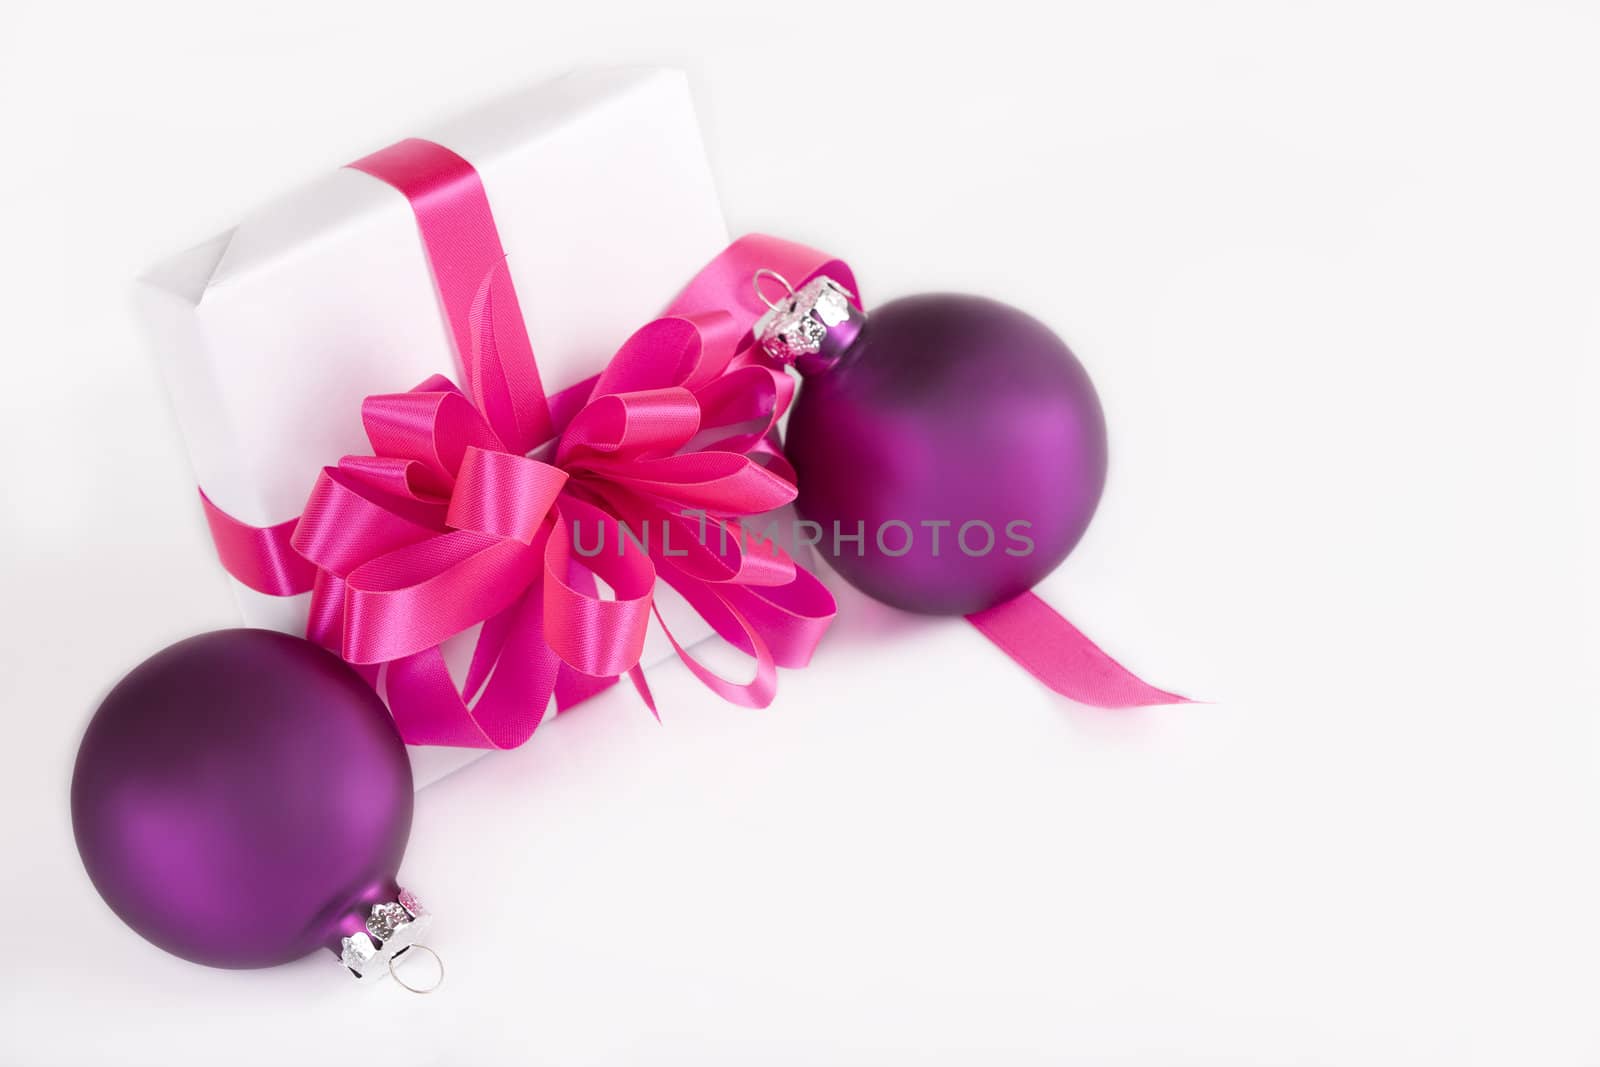 White present with pink ribbons and purple ornaments, isolated